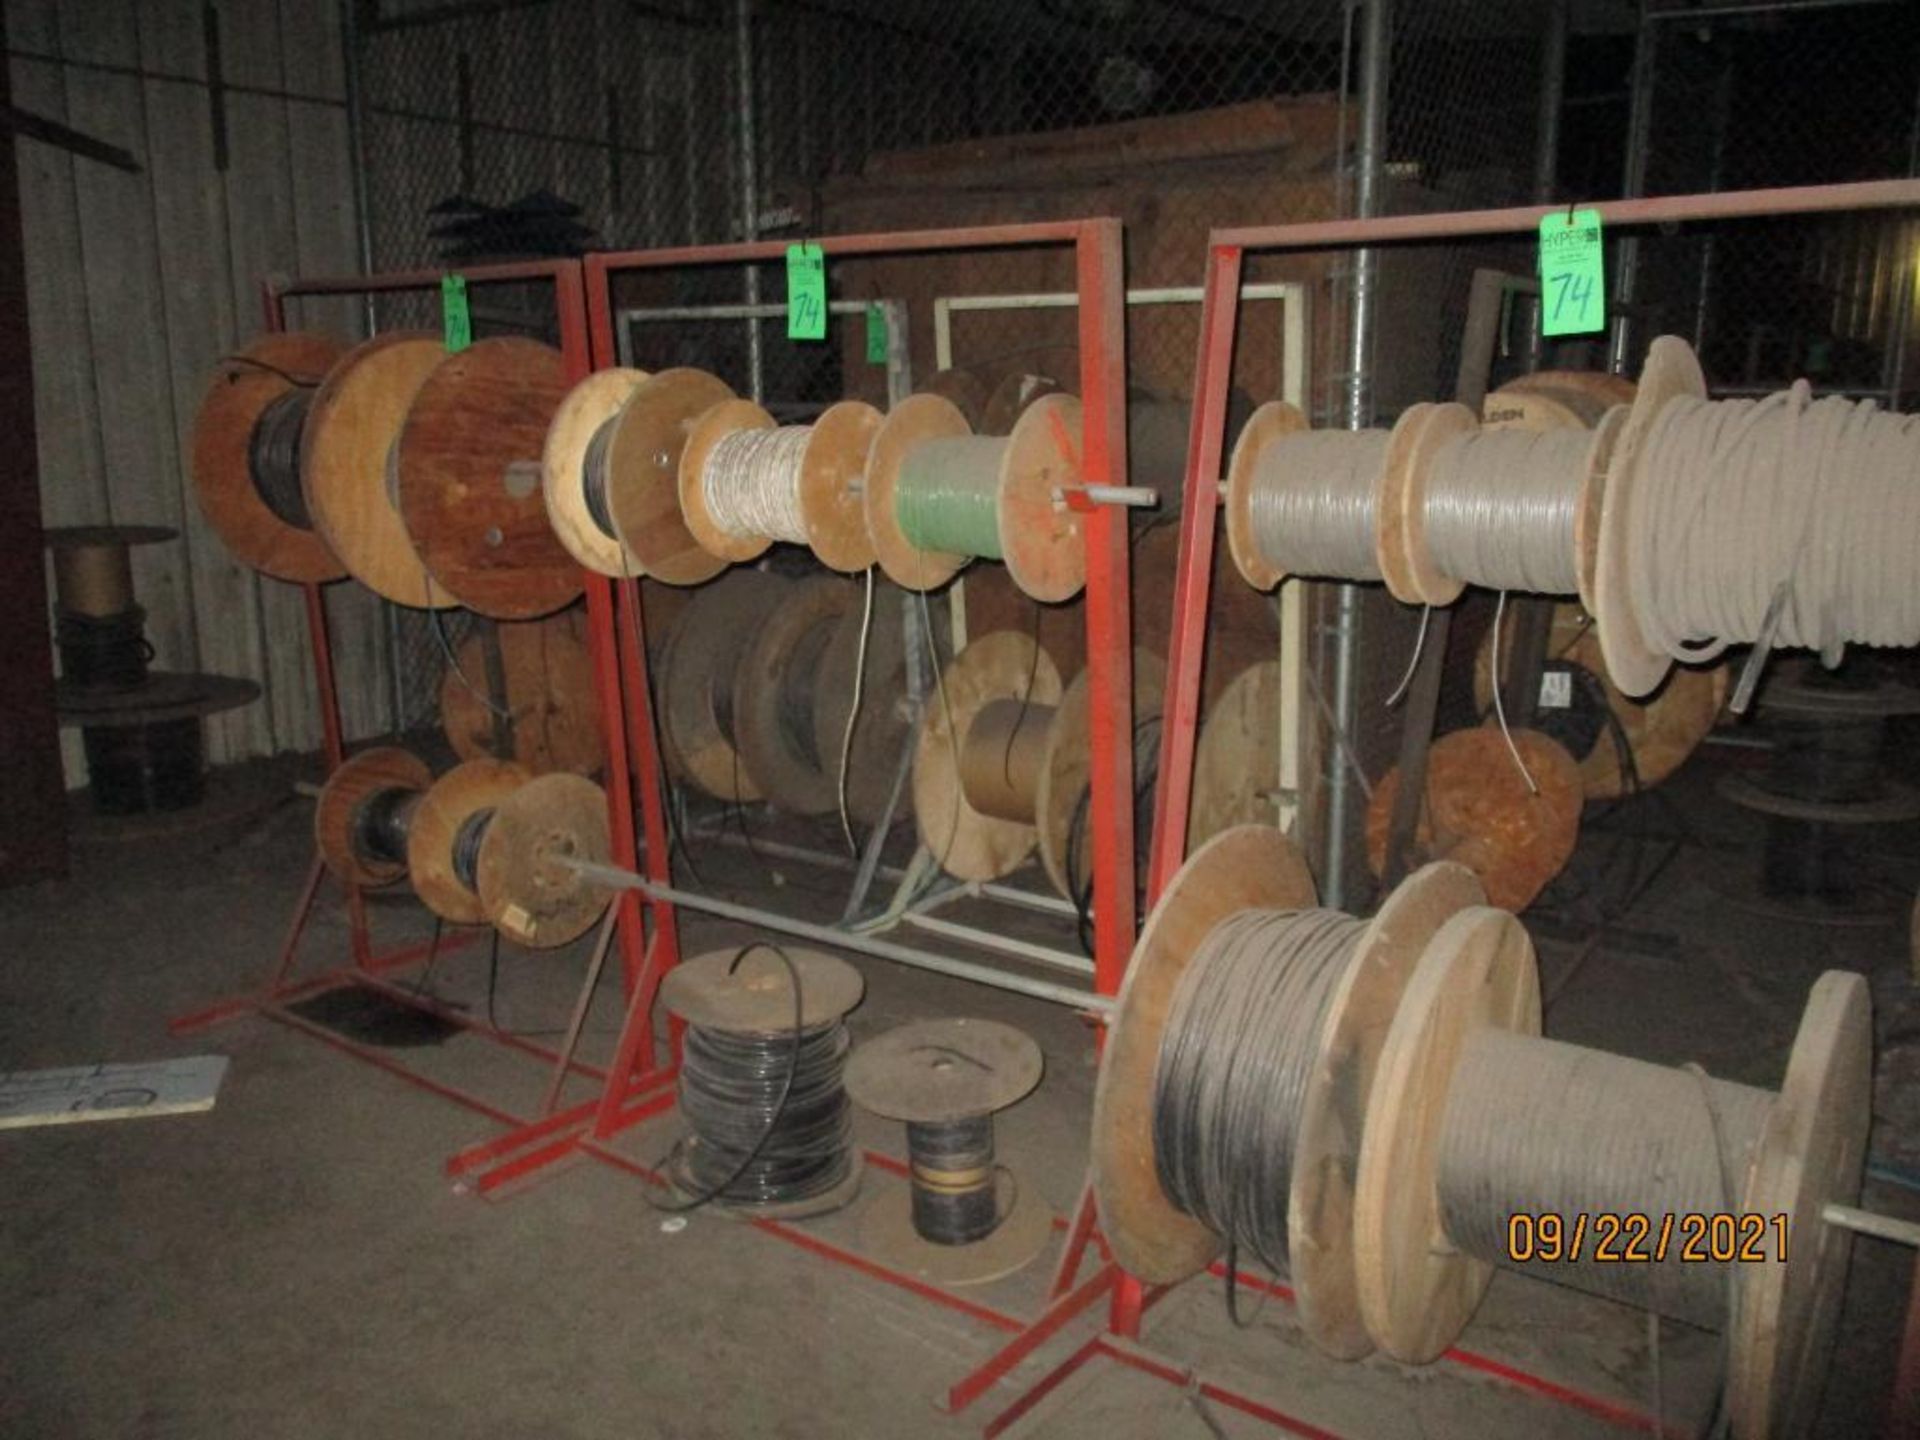 Lot c/o: Large Quantity Of Assorted Electrical Wire With Some Boxes, Located In Upstairs Mezzanine - Image 13 of 17